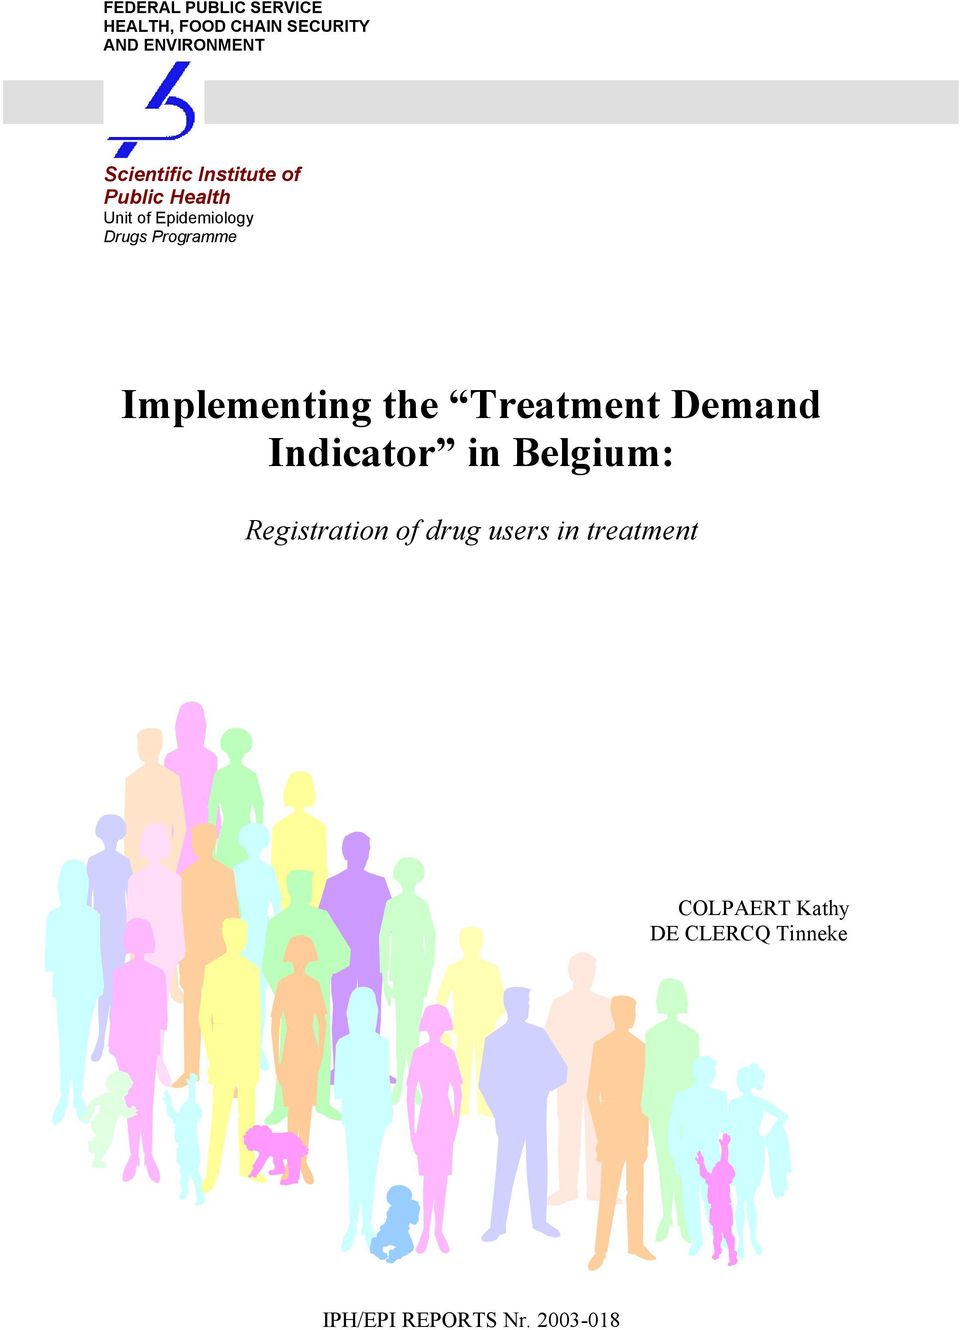 Implementing the Treatment Demand Indicator in Belgium: Registration of